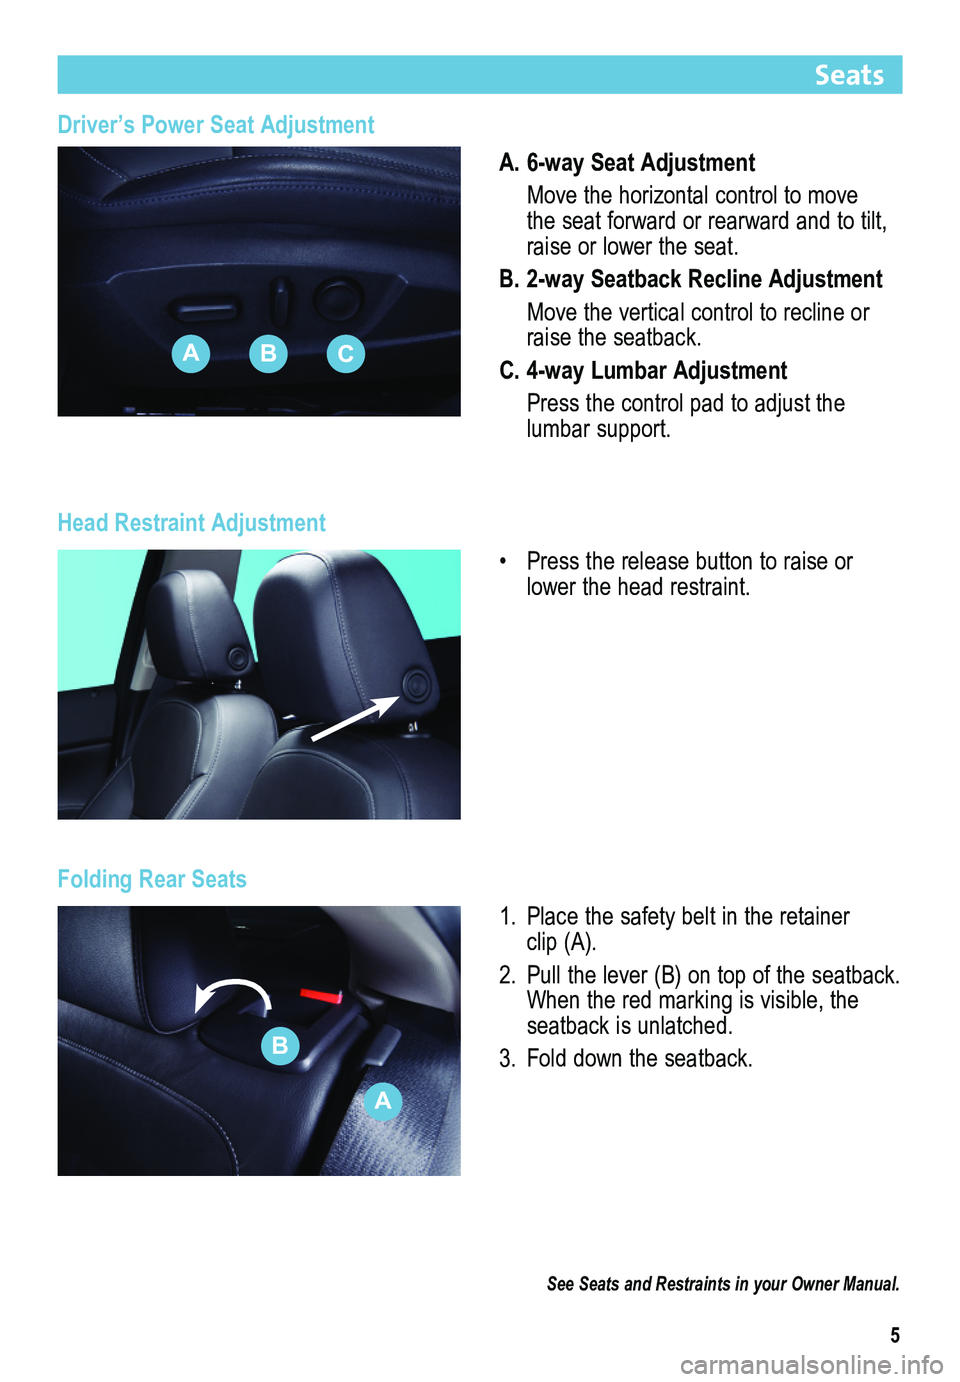 BUICK REGAL 2013  Get To Know Guide 5
Driver’s Power Seat Adjustment
A. 6-way Seat Adjustment
 Move the horizontal control to move the seat forward or rearward and to tilt, raise or lower the seat.
B. 2-way Seatback Recline Adjustment